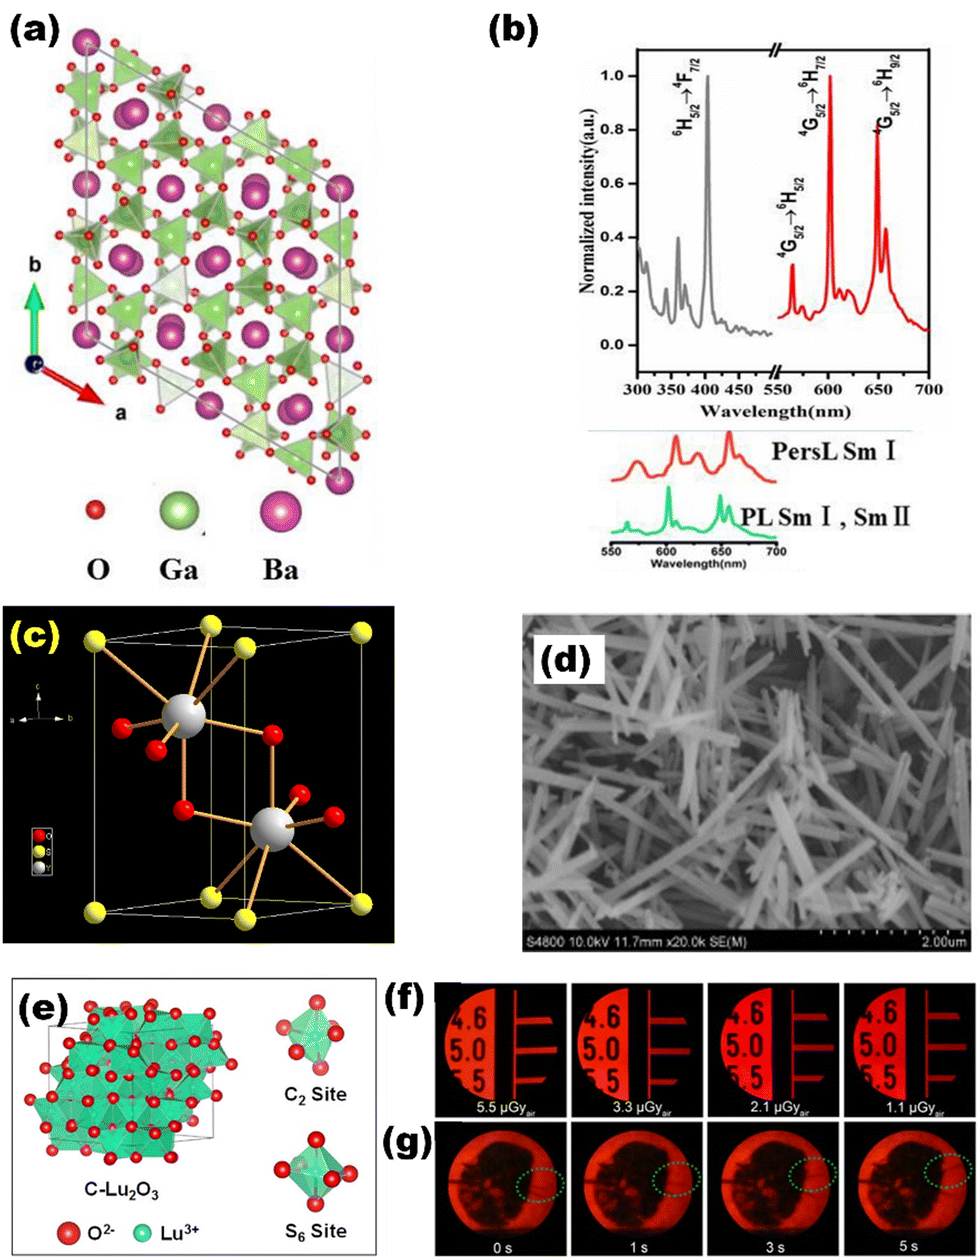 Lanthanide-Activated Phosphors Based on 4f-5d Optical Transitions